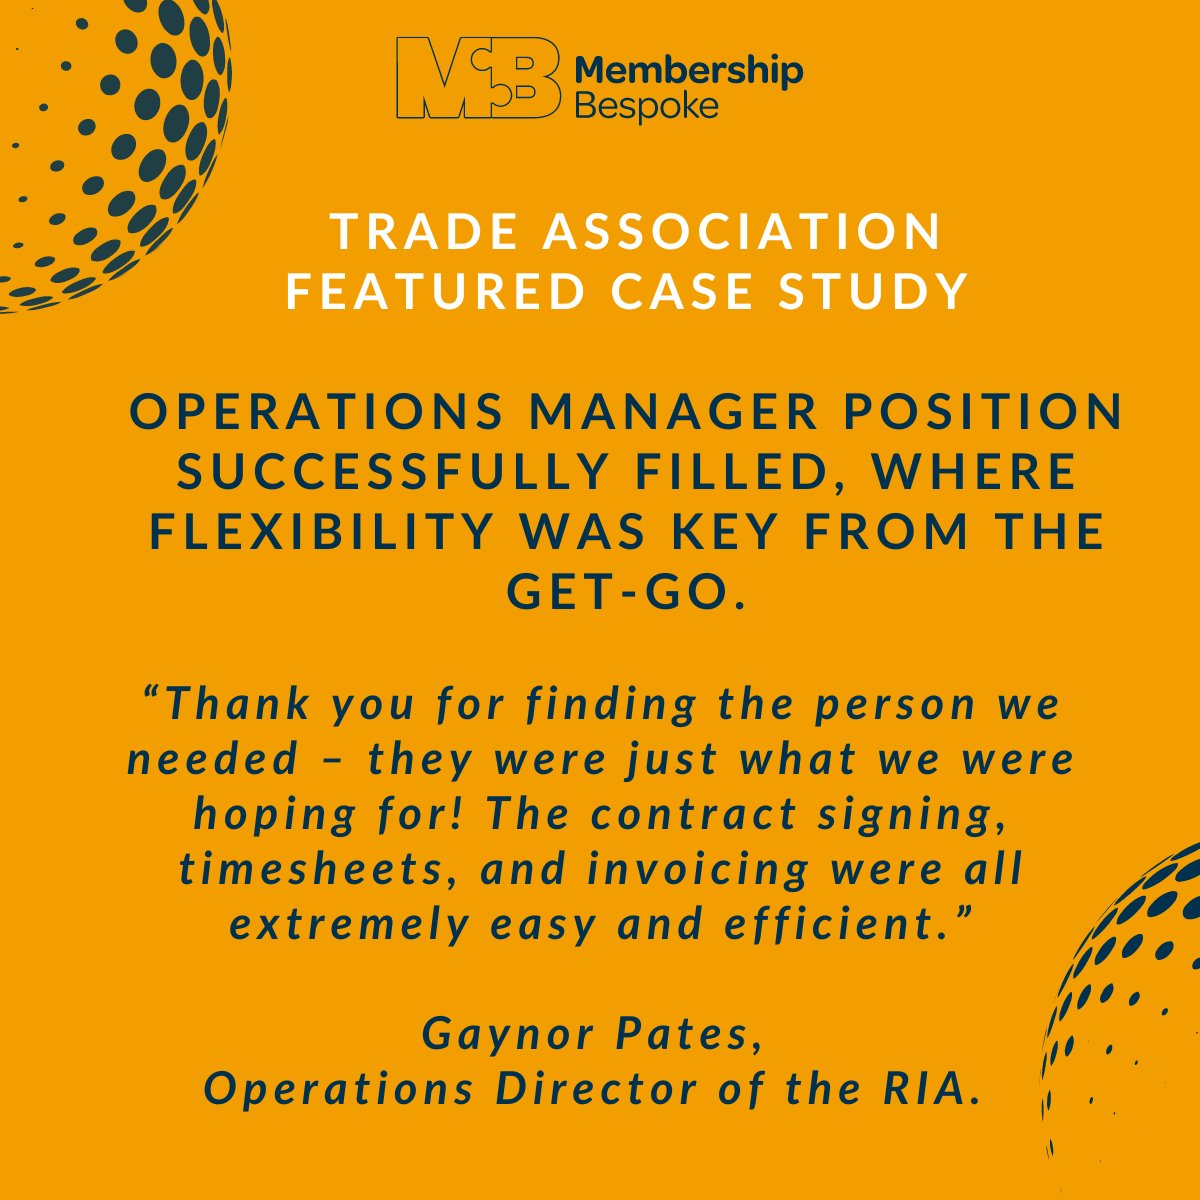 Take a look at @membershipjobs Case Study featuring @railindustry. bit.ly/3W2Oszw In today's fast-paced workplace, see how adaptability was essential for success in this operations role right from the get-go. bit.ly/3W2Oszw #TradeAssociation #MembershipSector